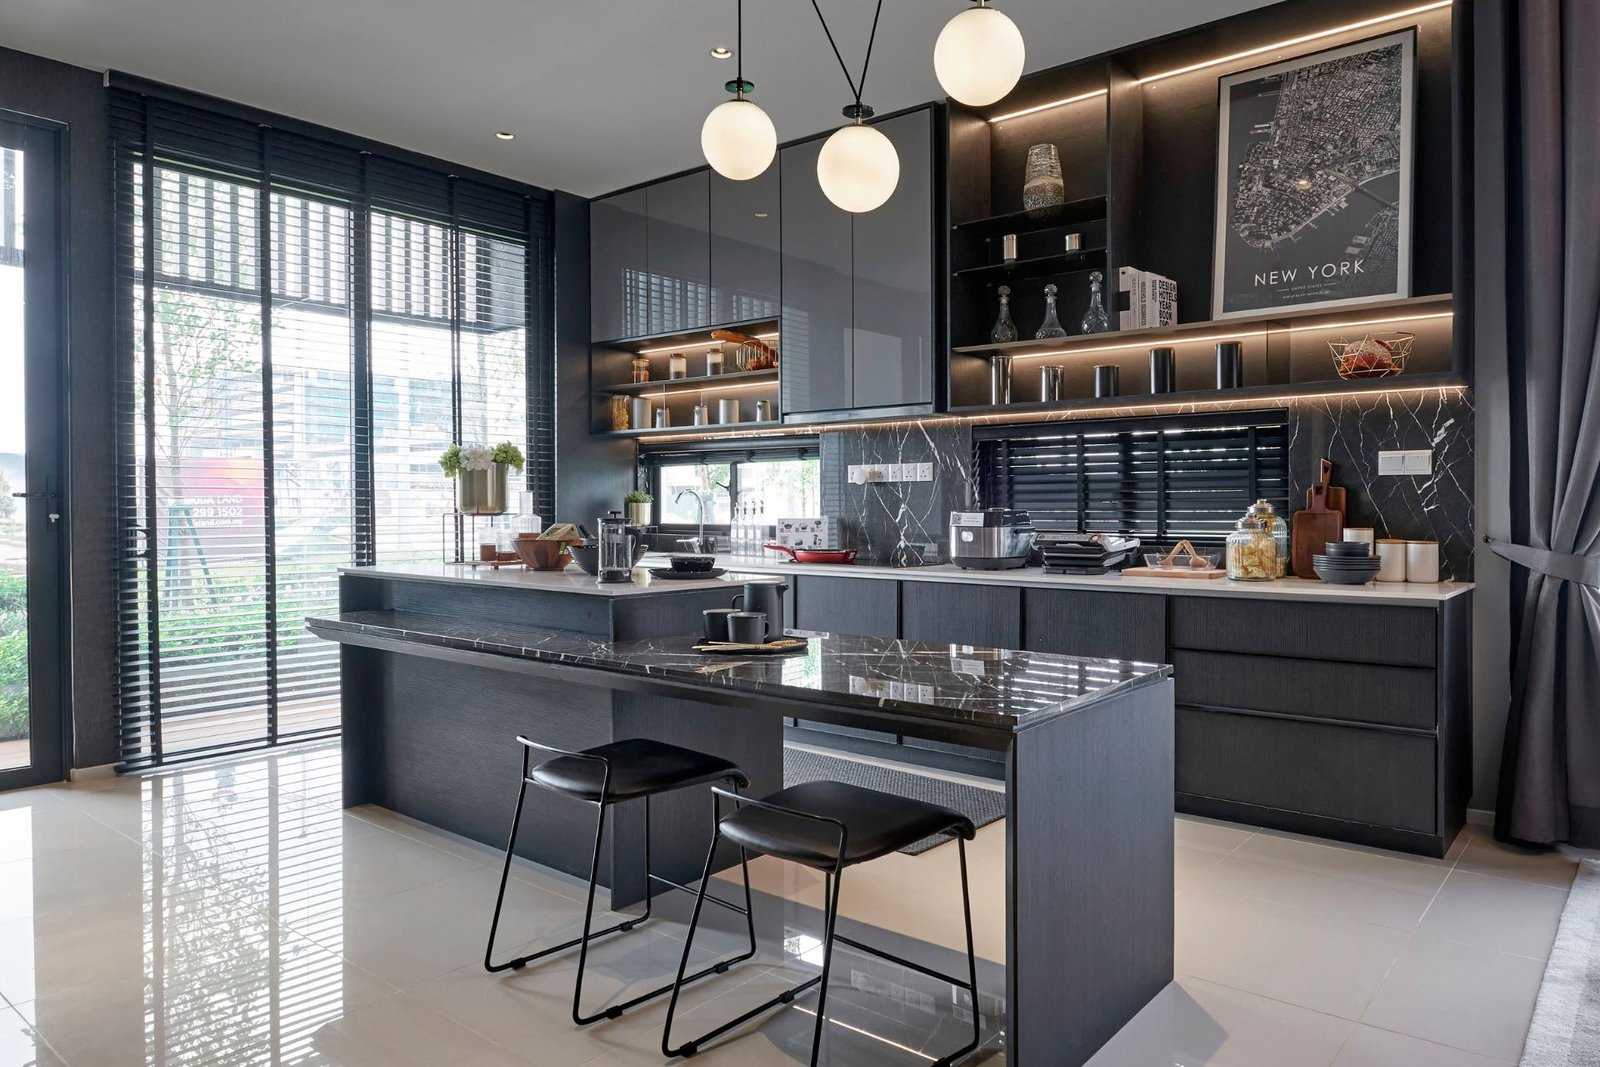 An example of modern kitchen designs in sleek black and metal